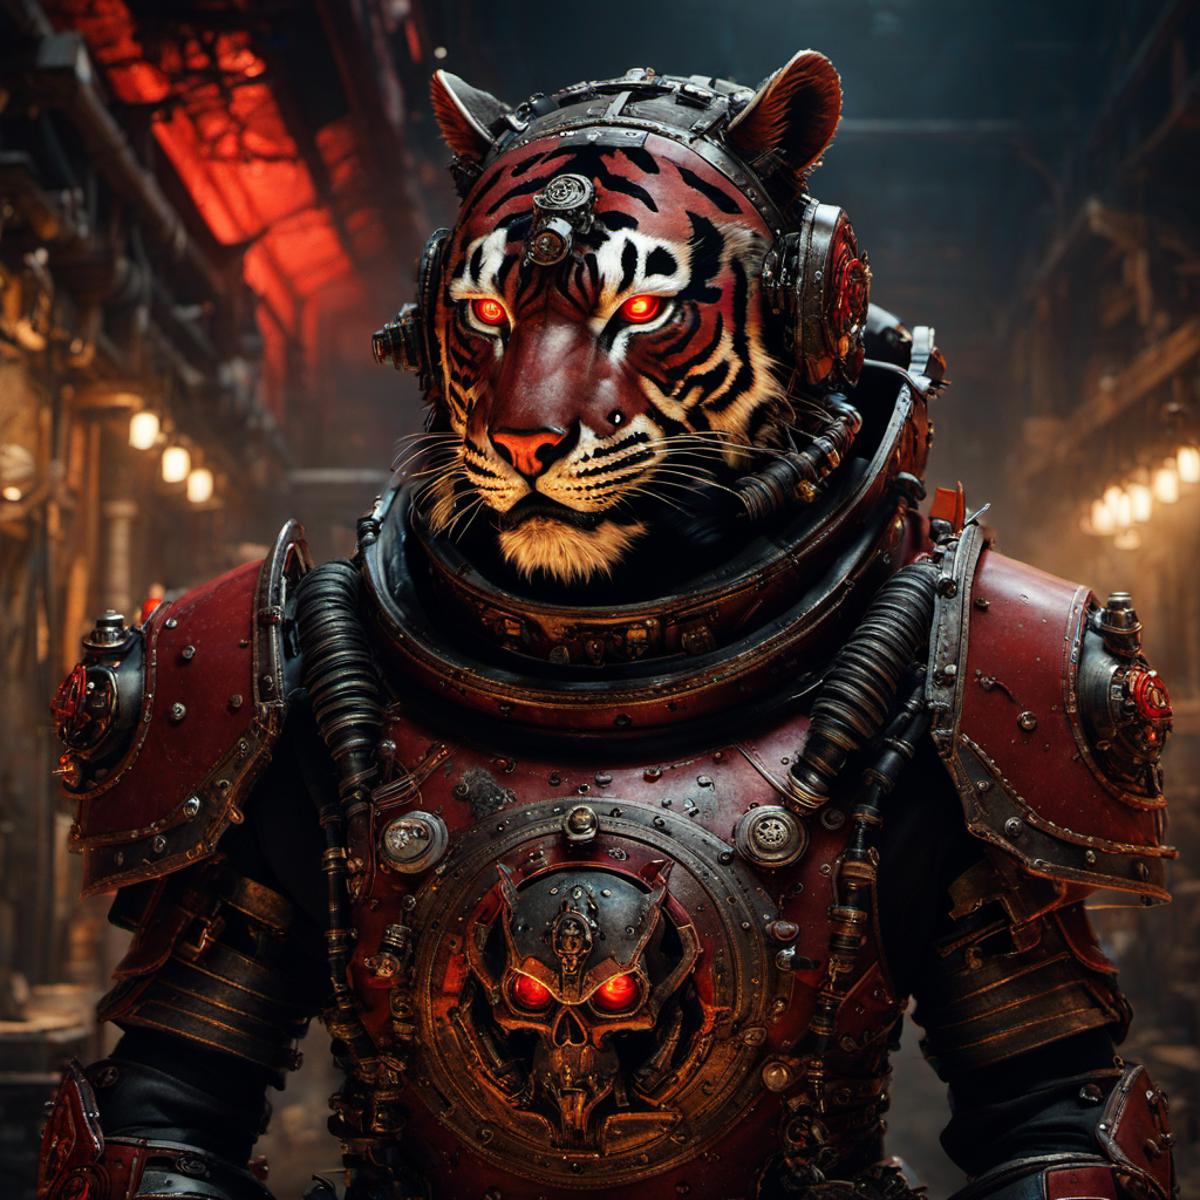 A Warrior in an Iron Mask and Tiger Costume, with a Tiger Head as a Helmet.